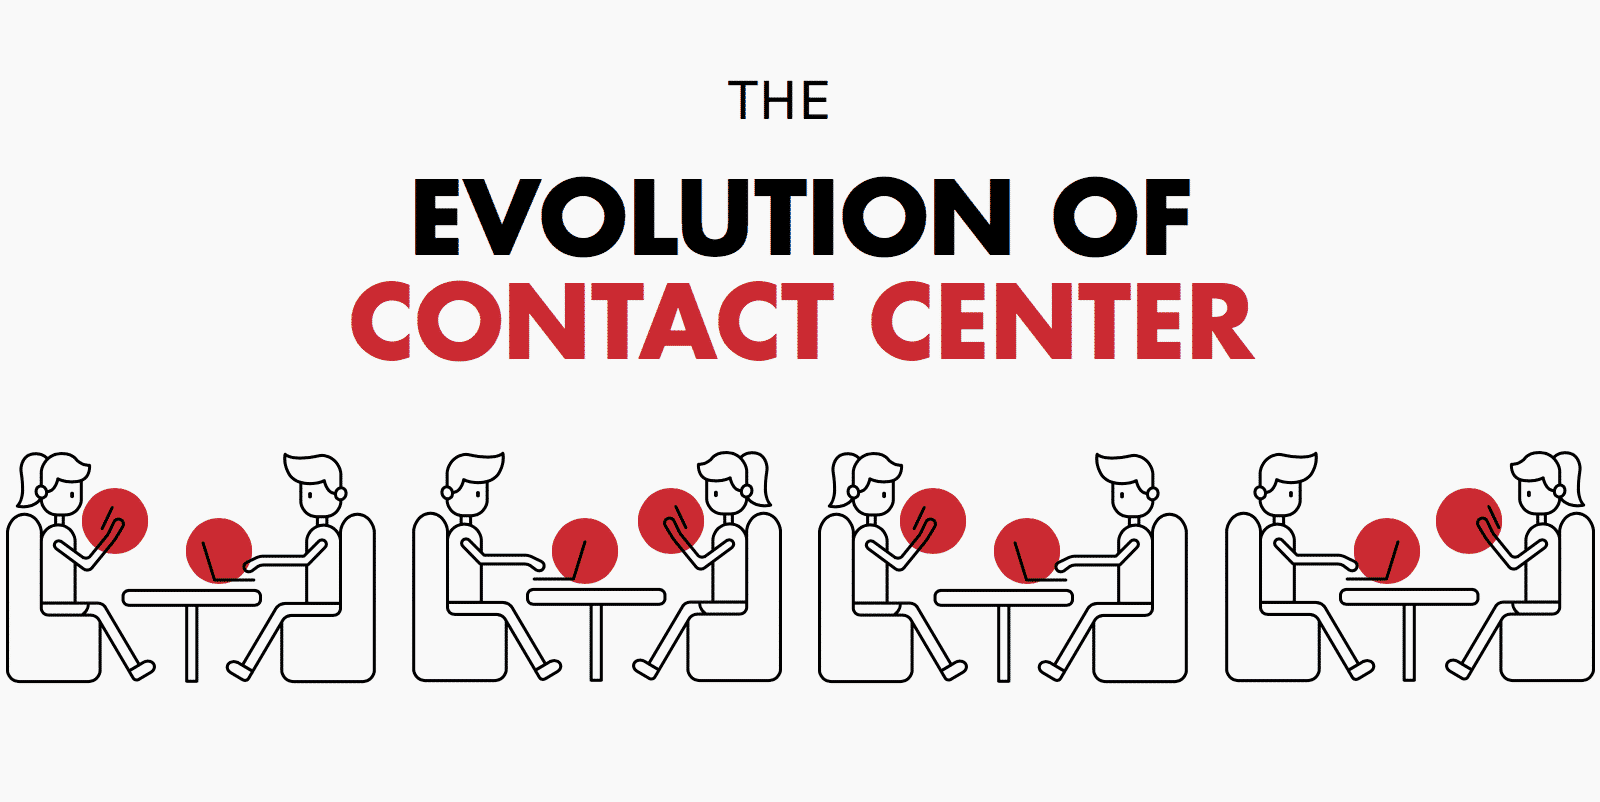 The Evolution of Contact Center